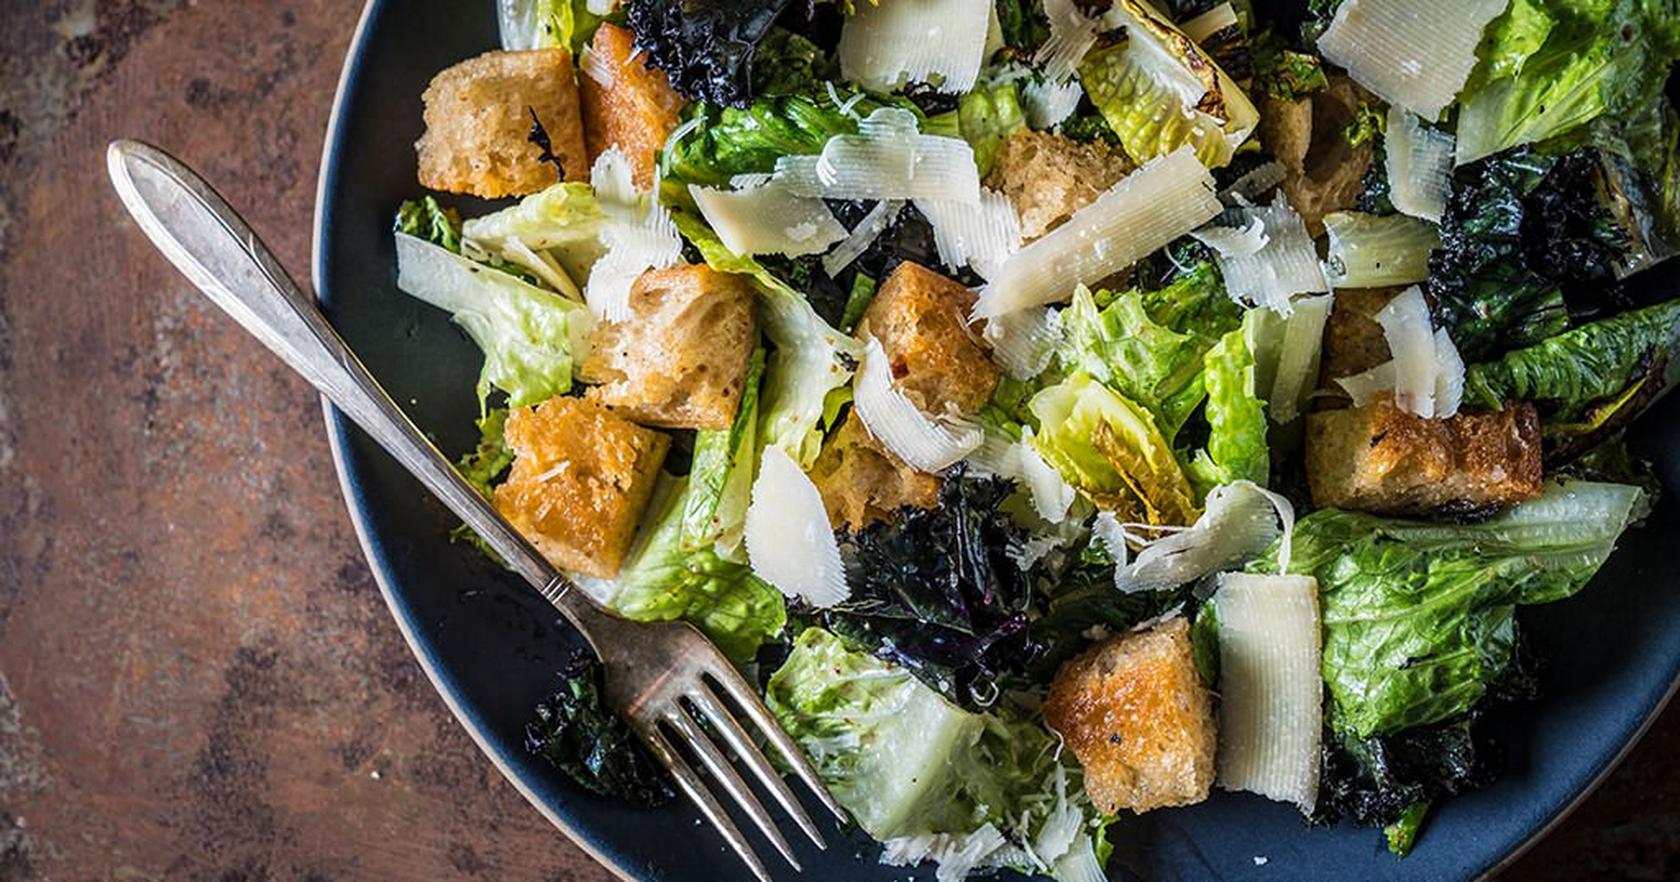 image of Grilled Kale Caesar Salad with Homemade Croutons